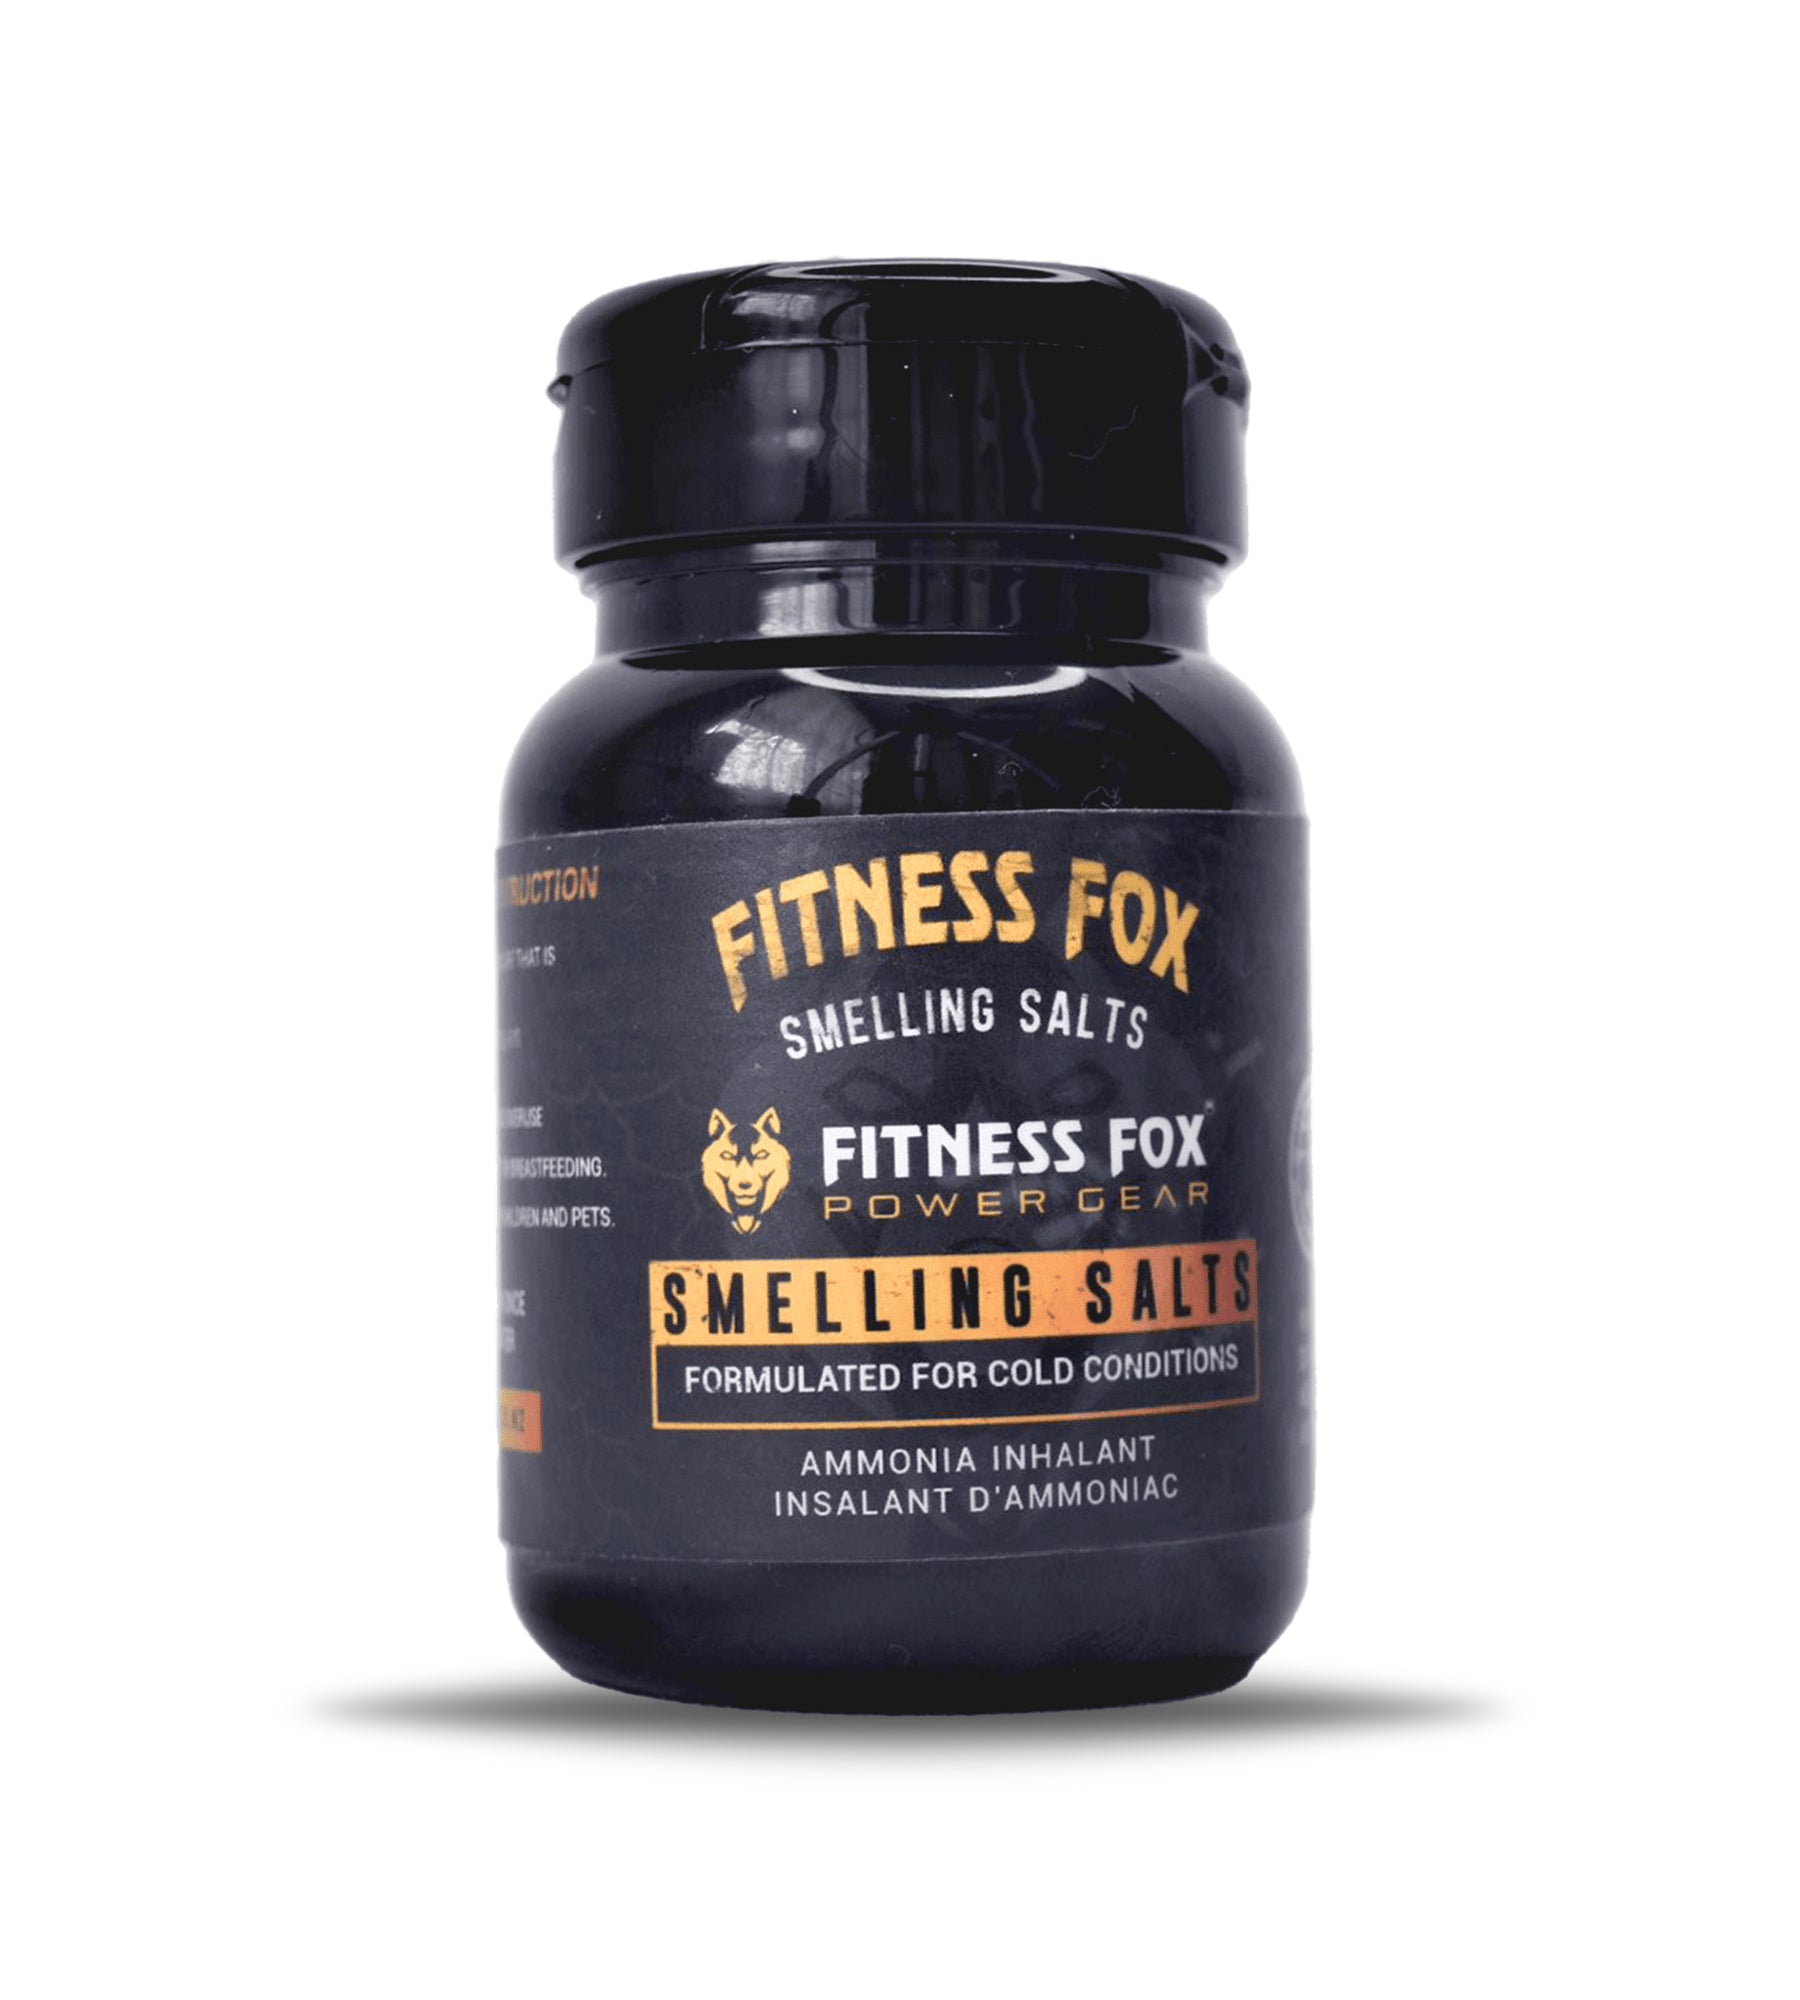 FITNESS FOX Gym Smelling Salts for Athletes & fitness enthusiasts